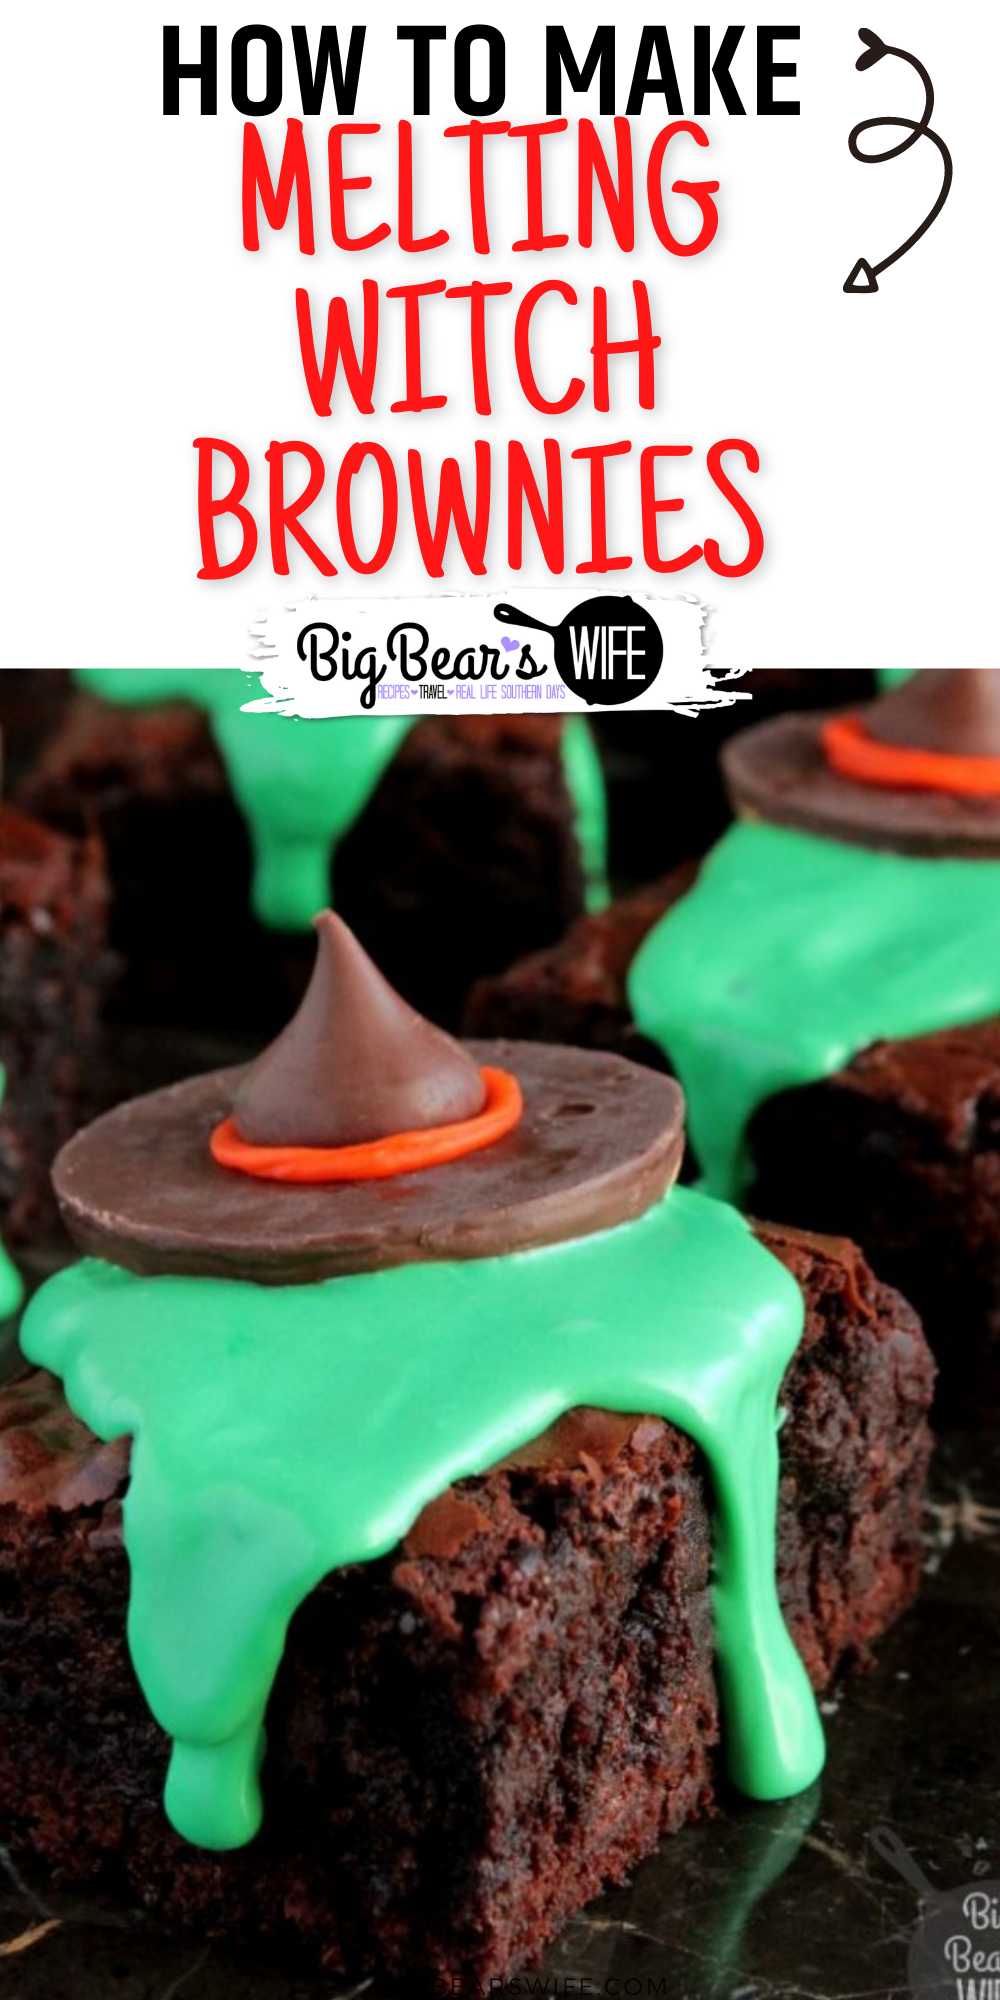 These Melting Witch Brownies are giving us serious Wizard of Oz vibes by melting wicked witches over these brownies. These are fantastic for Halloween!  via @bigbearswife